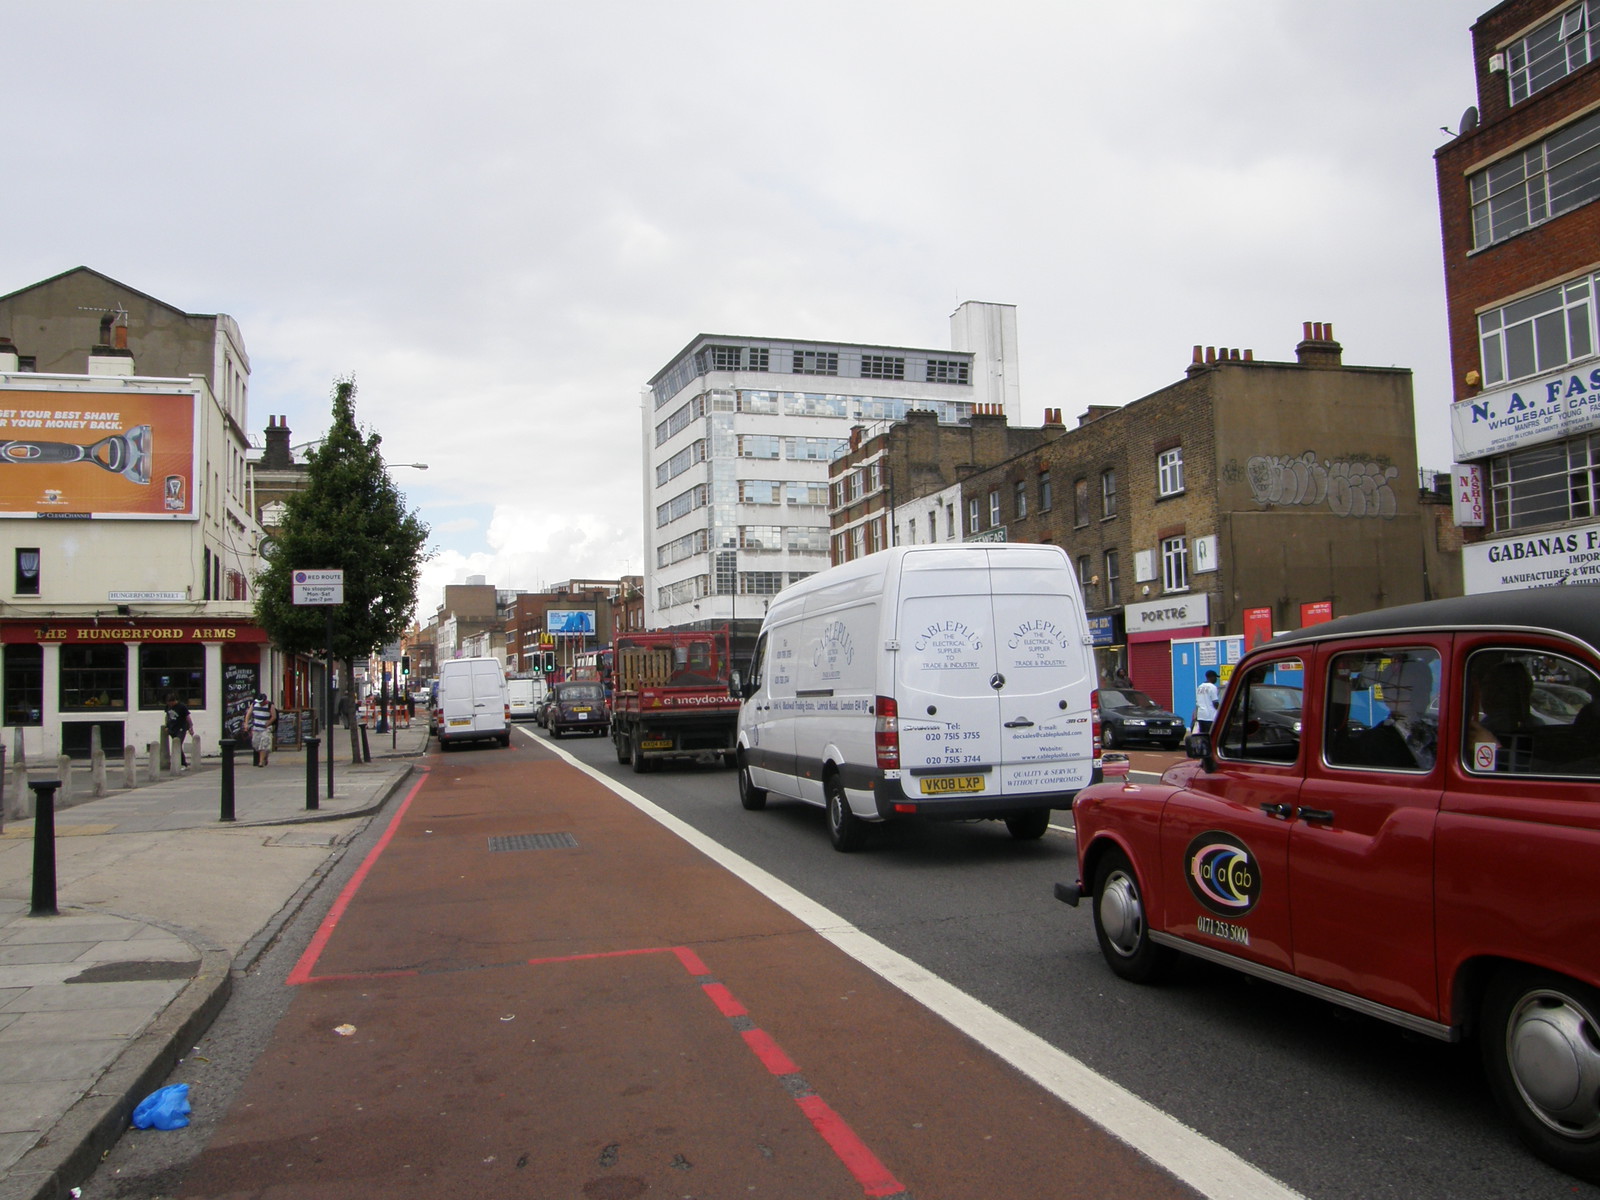 Image from Shoreditch to New Cross and New Cross Gate